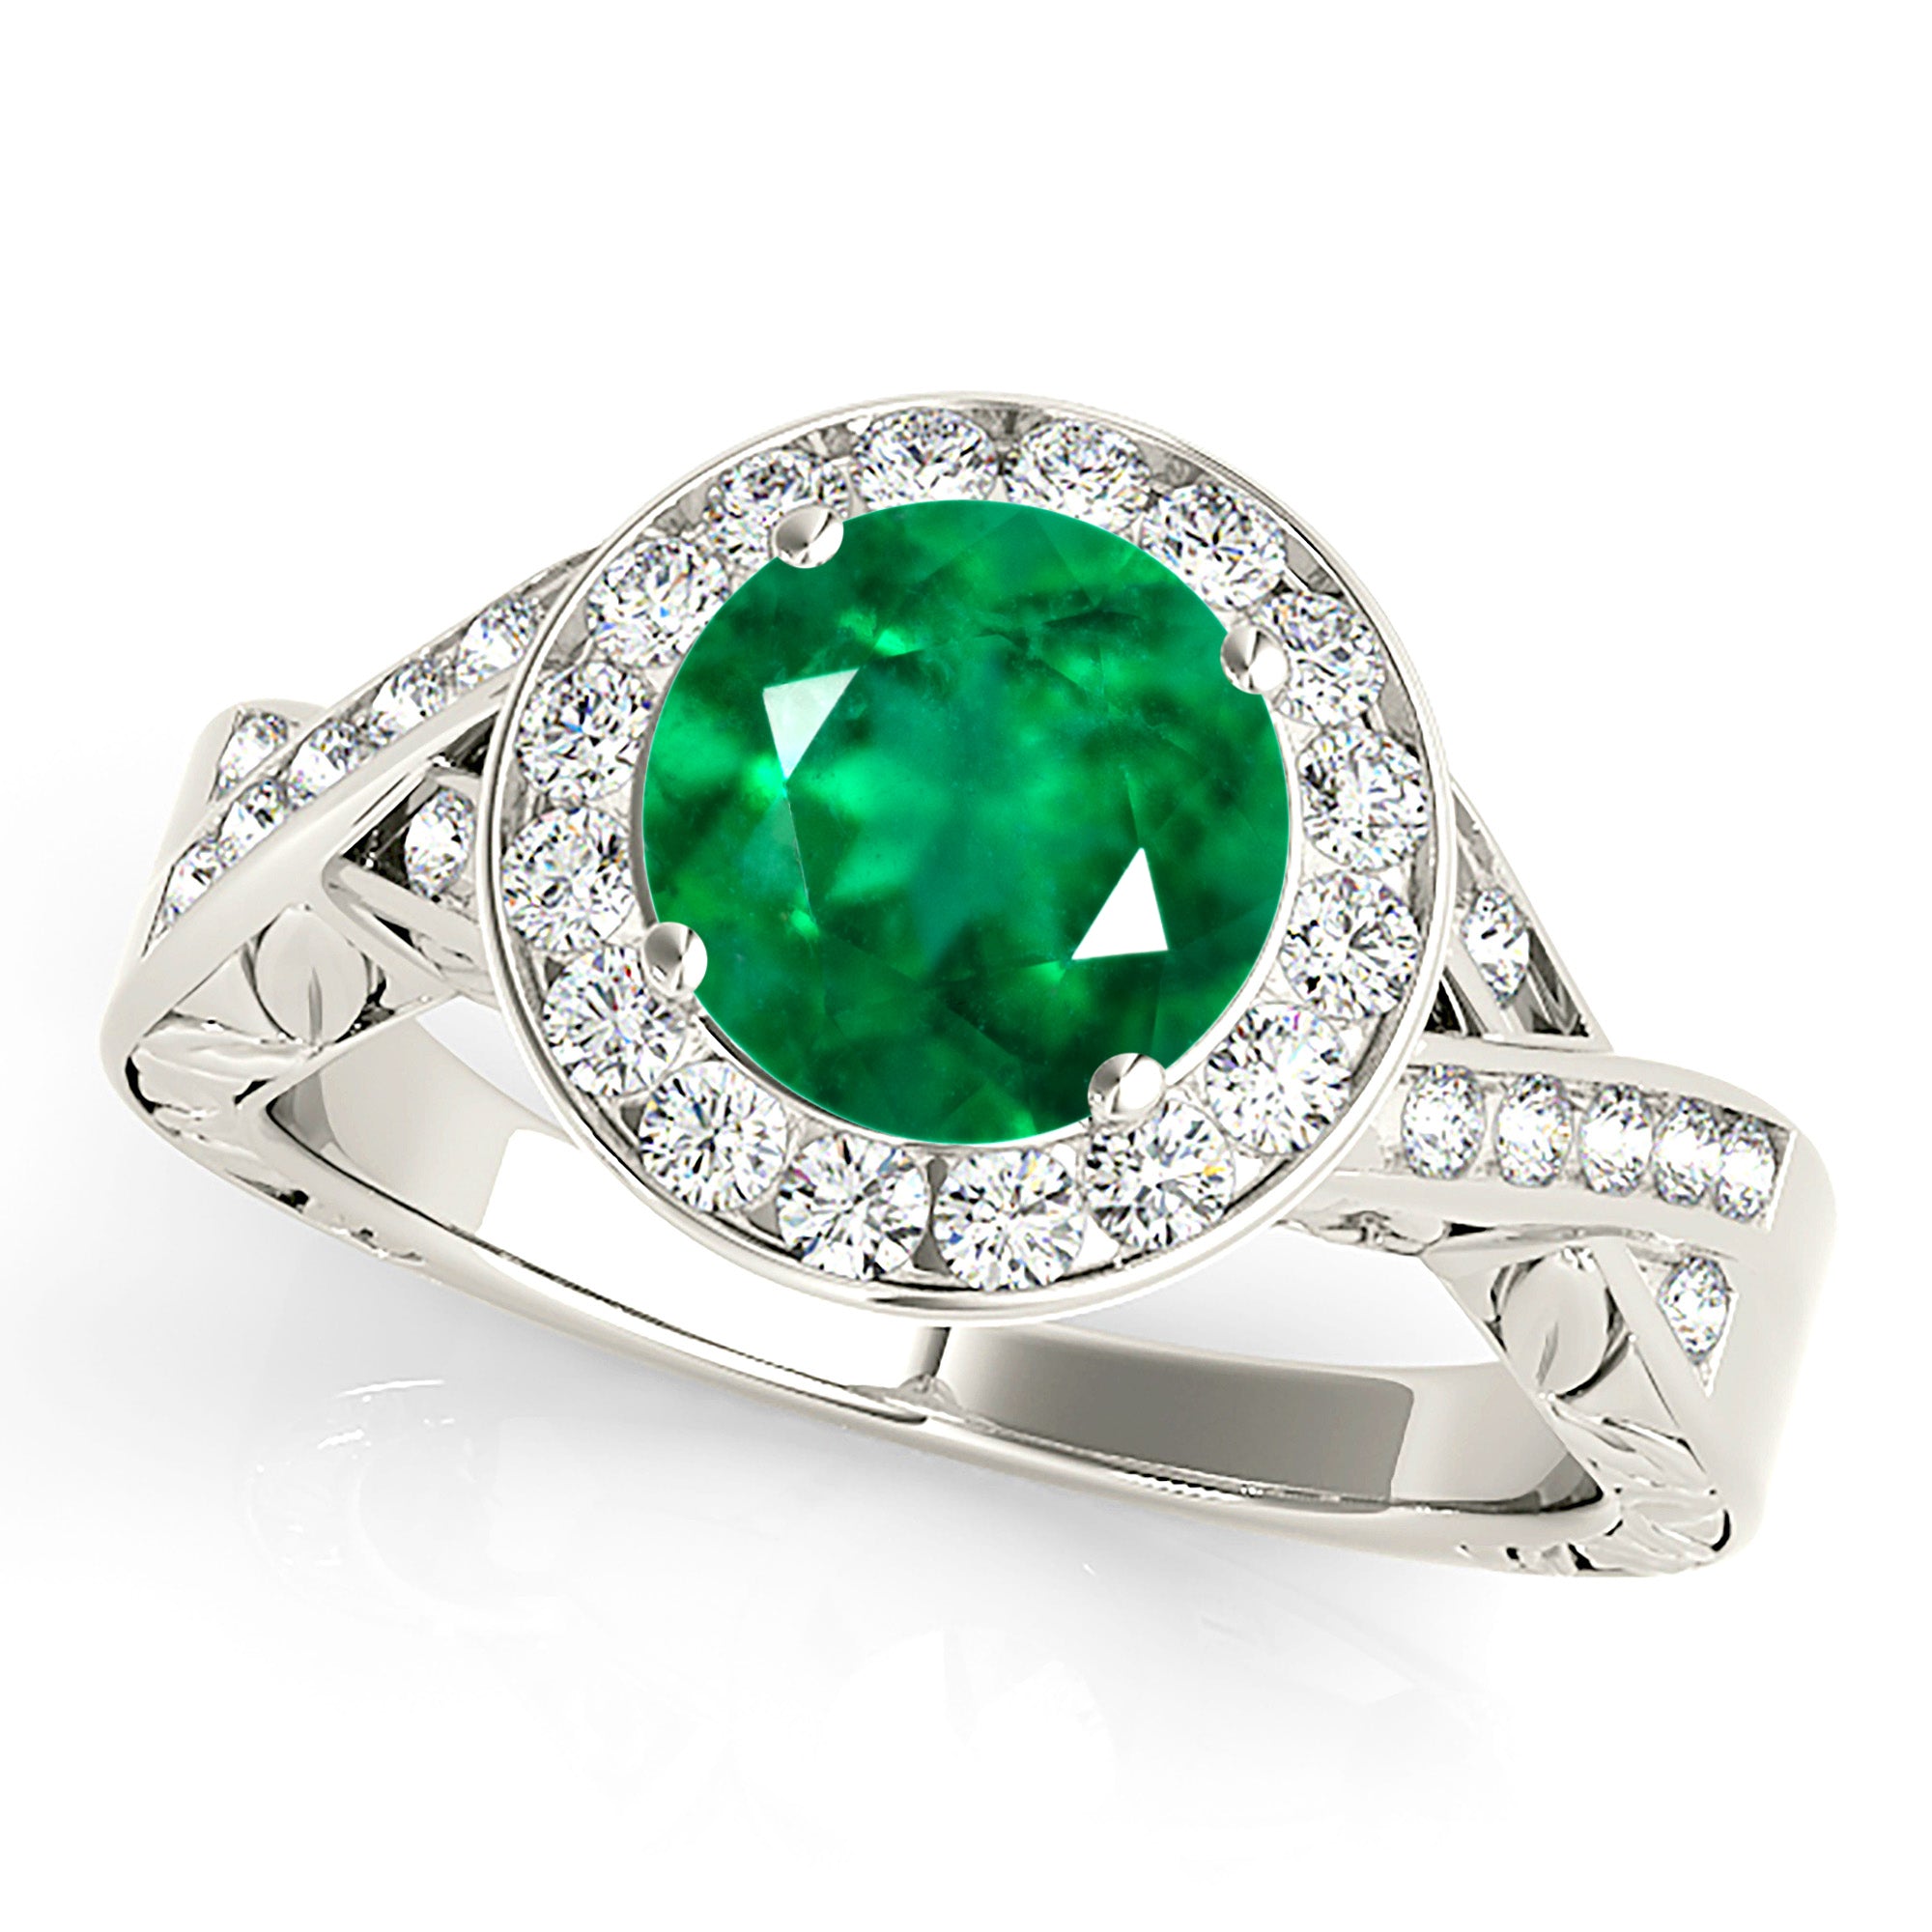 1.75 ct. Genuine Emerald Ring With 0.25 ctw. Channel Set Diamond Halo,Twist Band,Filigree Accent-in 14K/18K White, Yellow, Rose Gold and Platinum - Christmas Jewelry Gift -VIRABYANI